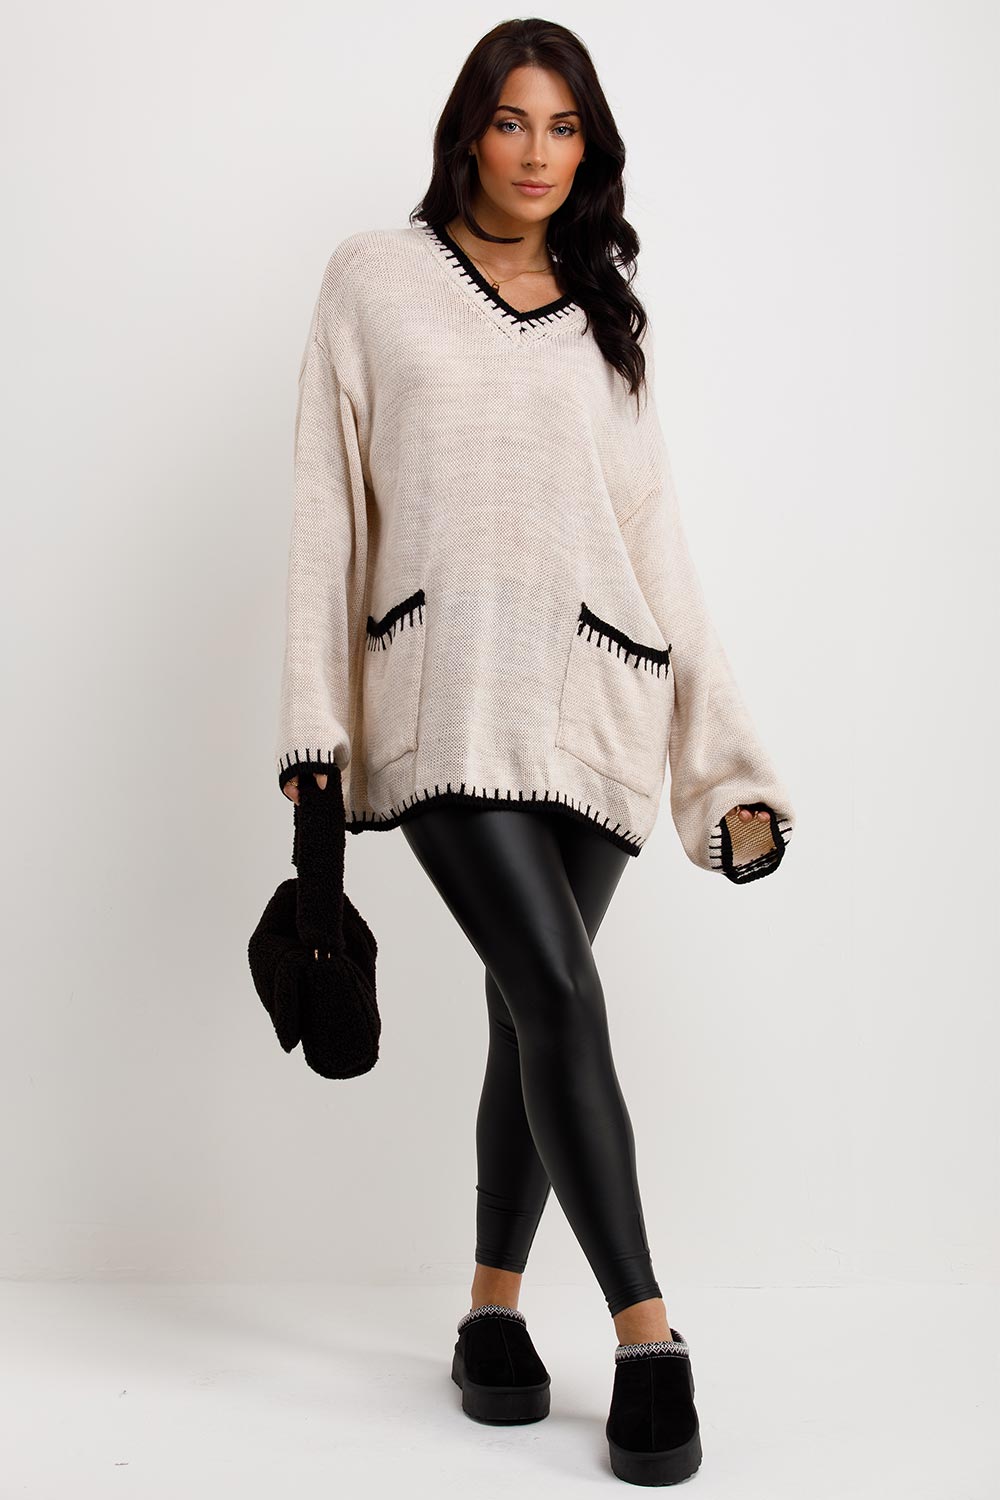 oversized knitted jumper with contrast stitchesand pockets